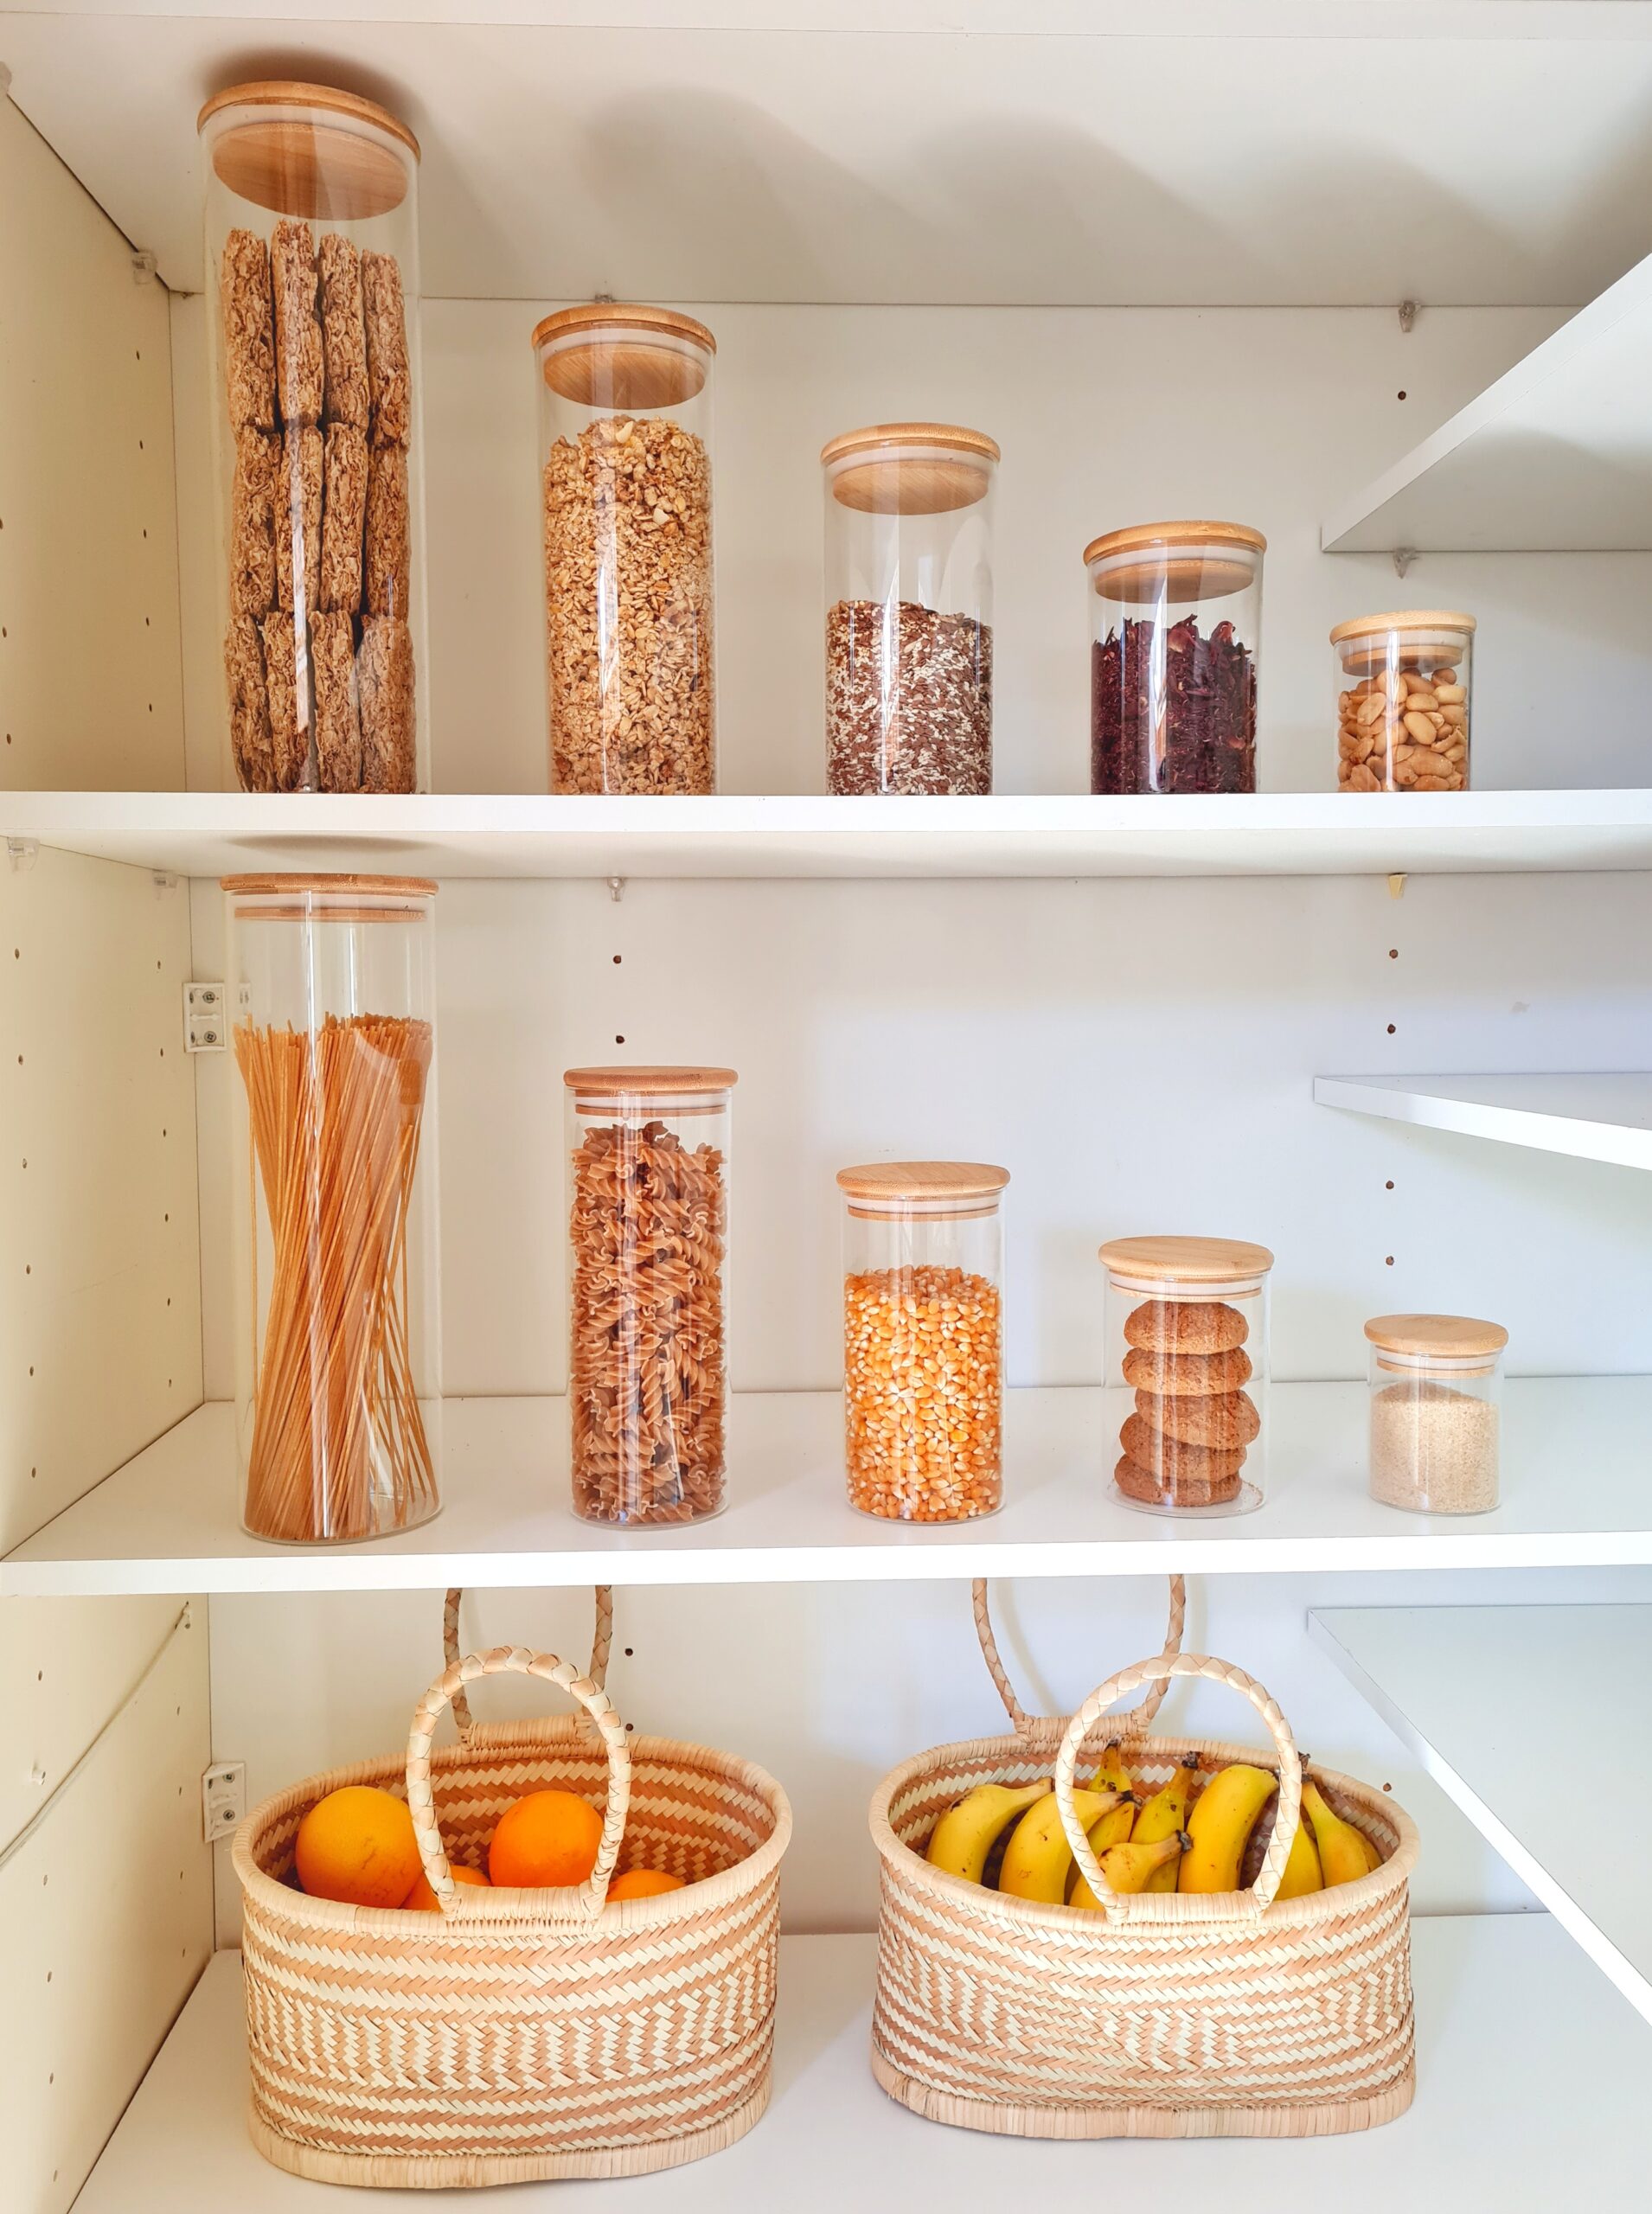 BAMBOO PANTRY GLASS JARS – That Organized Home